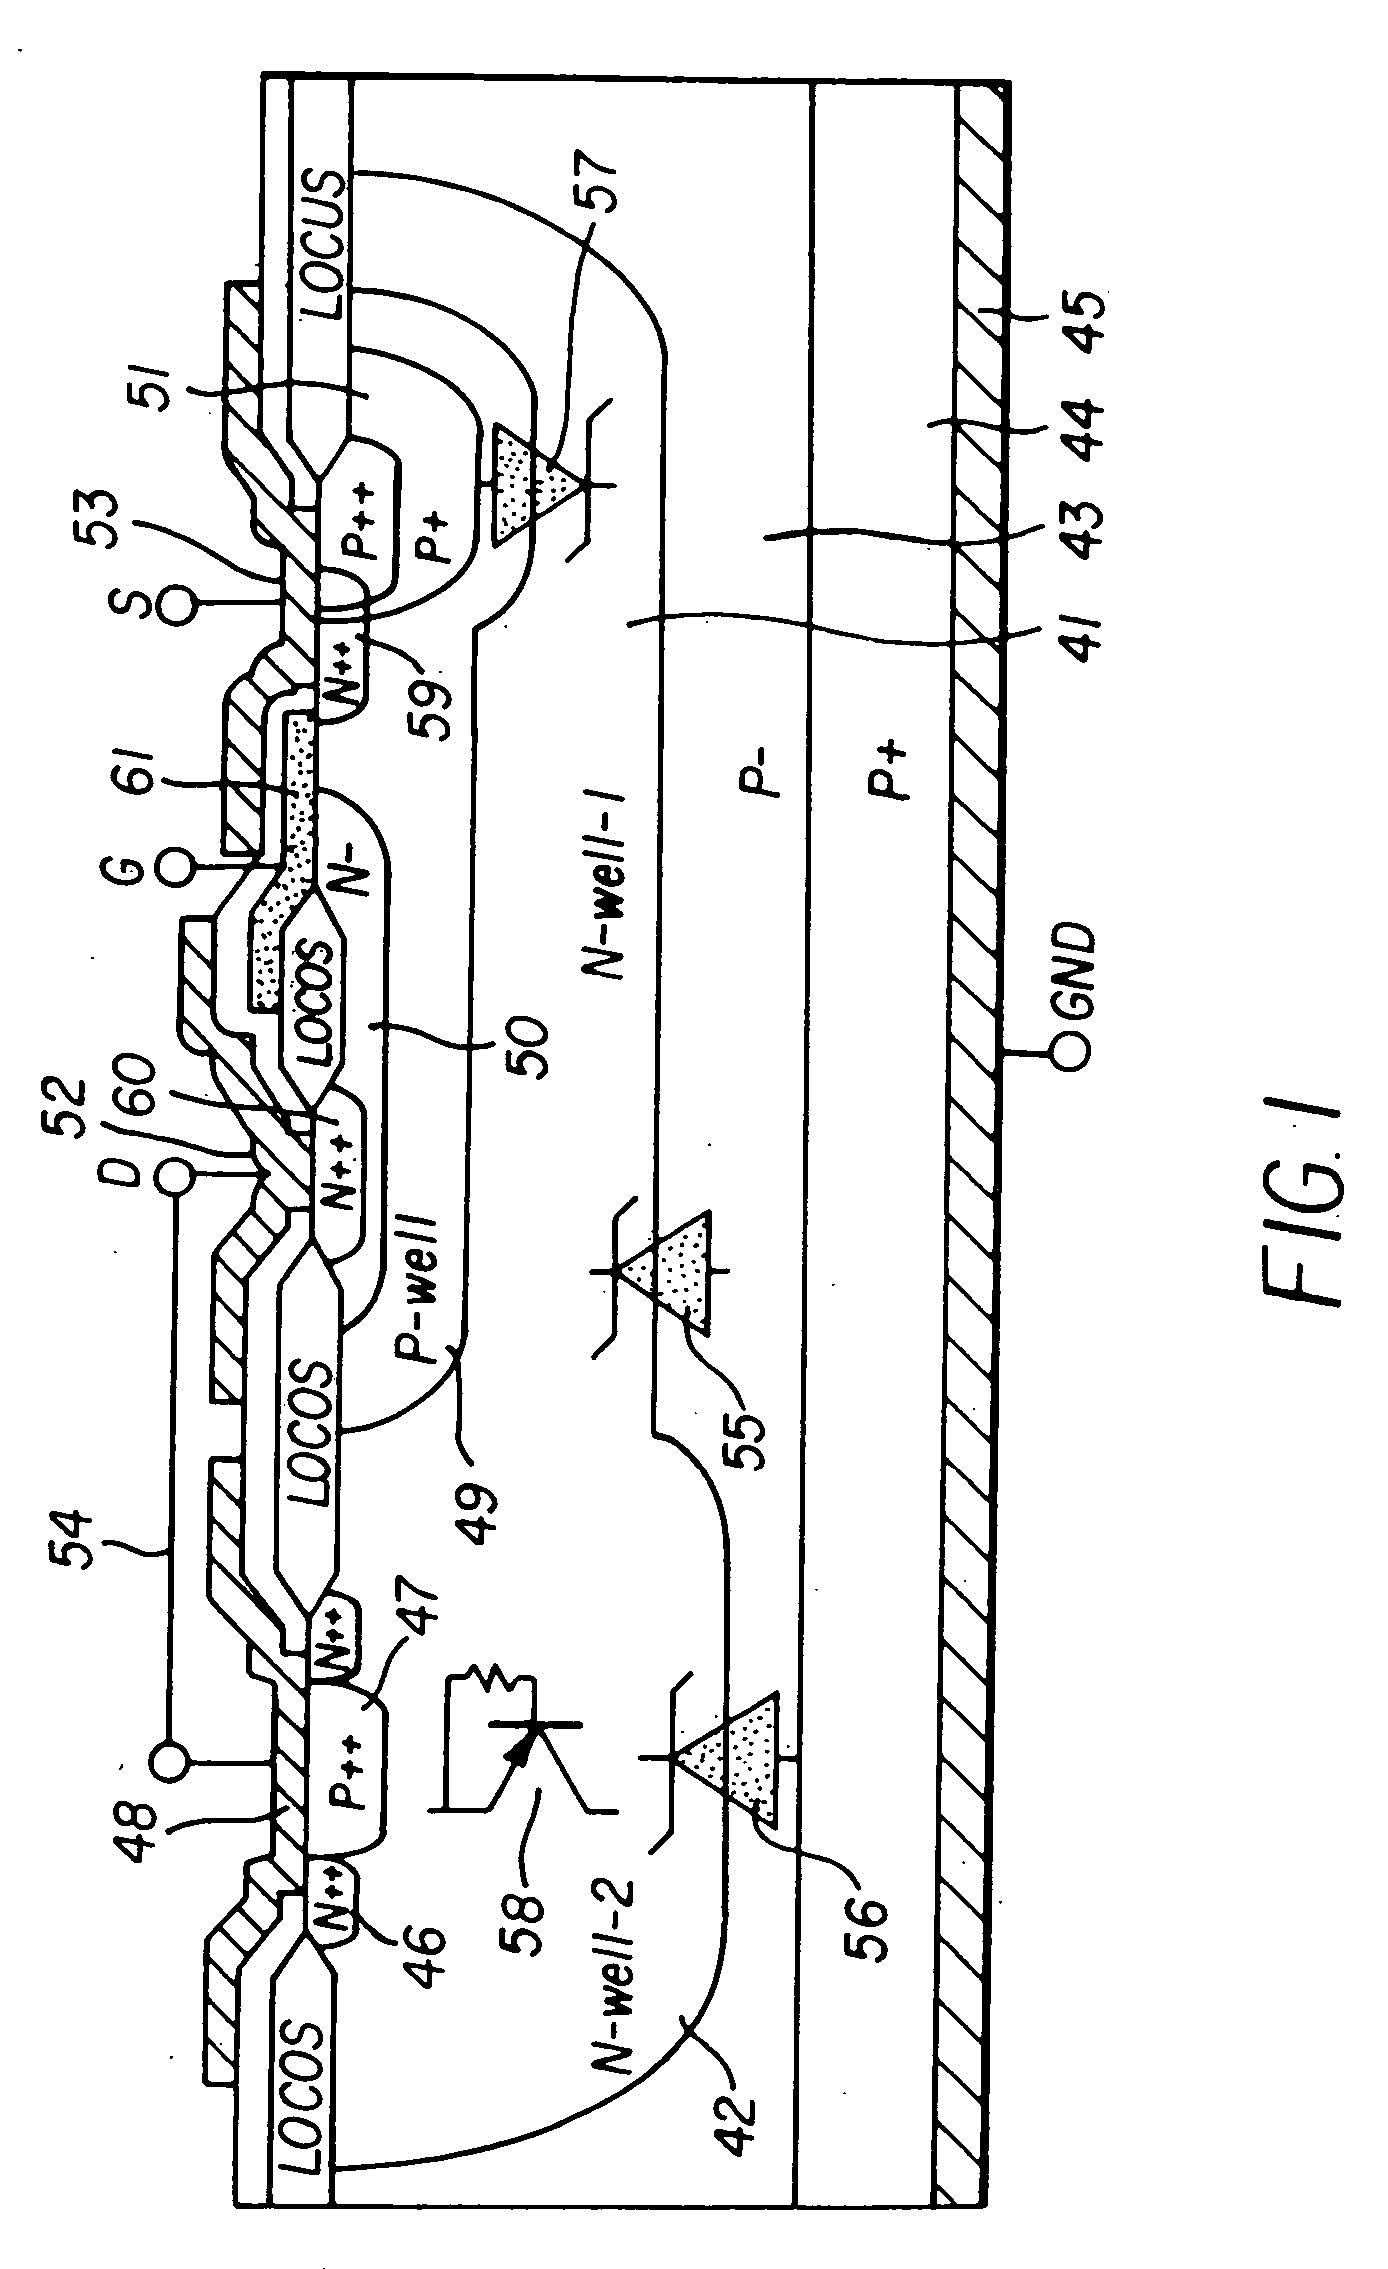 Semiconductor device having a lateral MOSFET and combined IC using the same